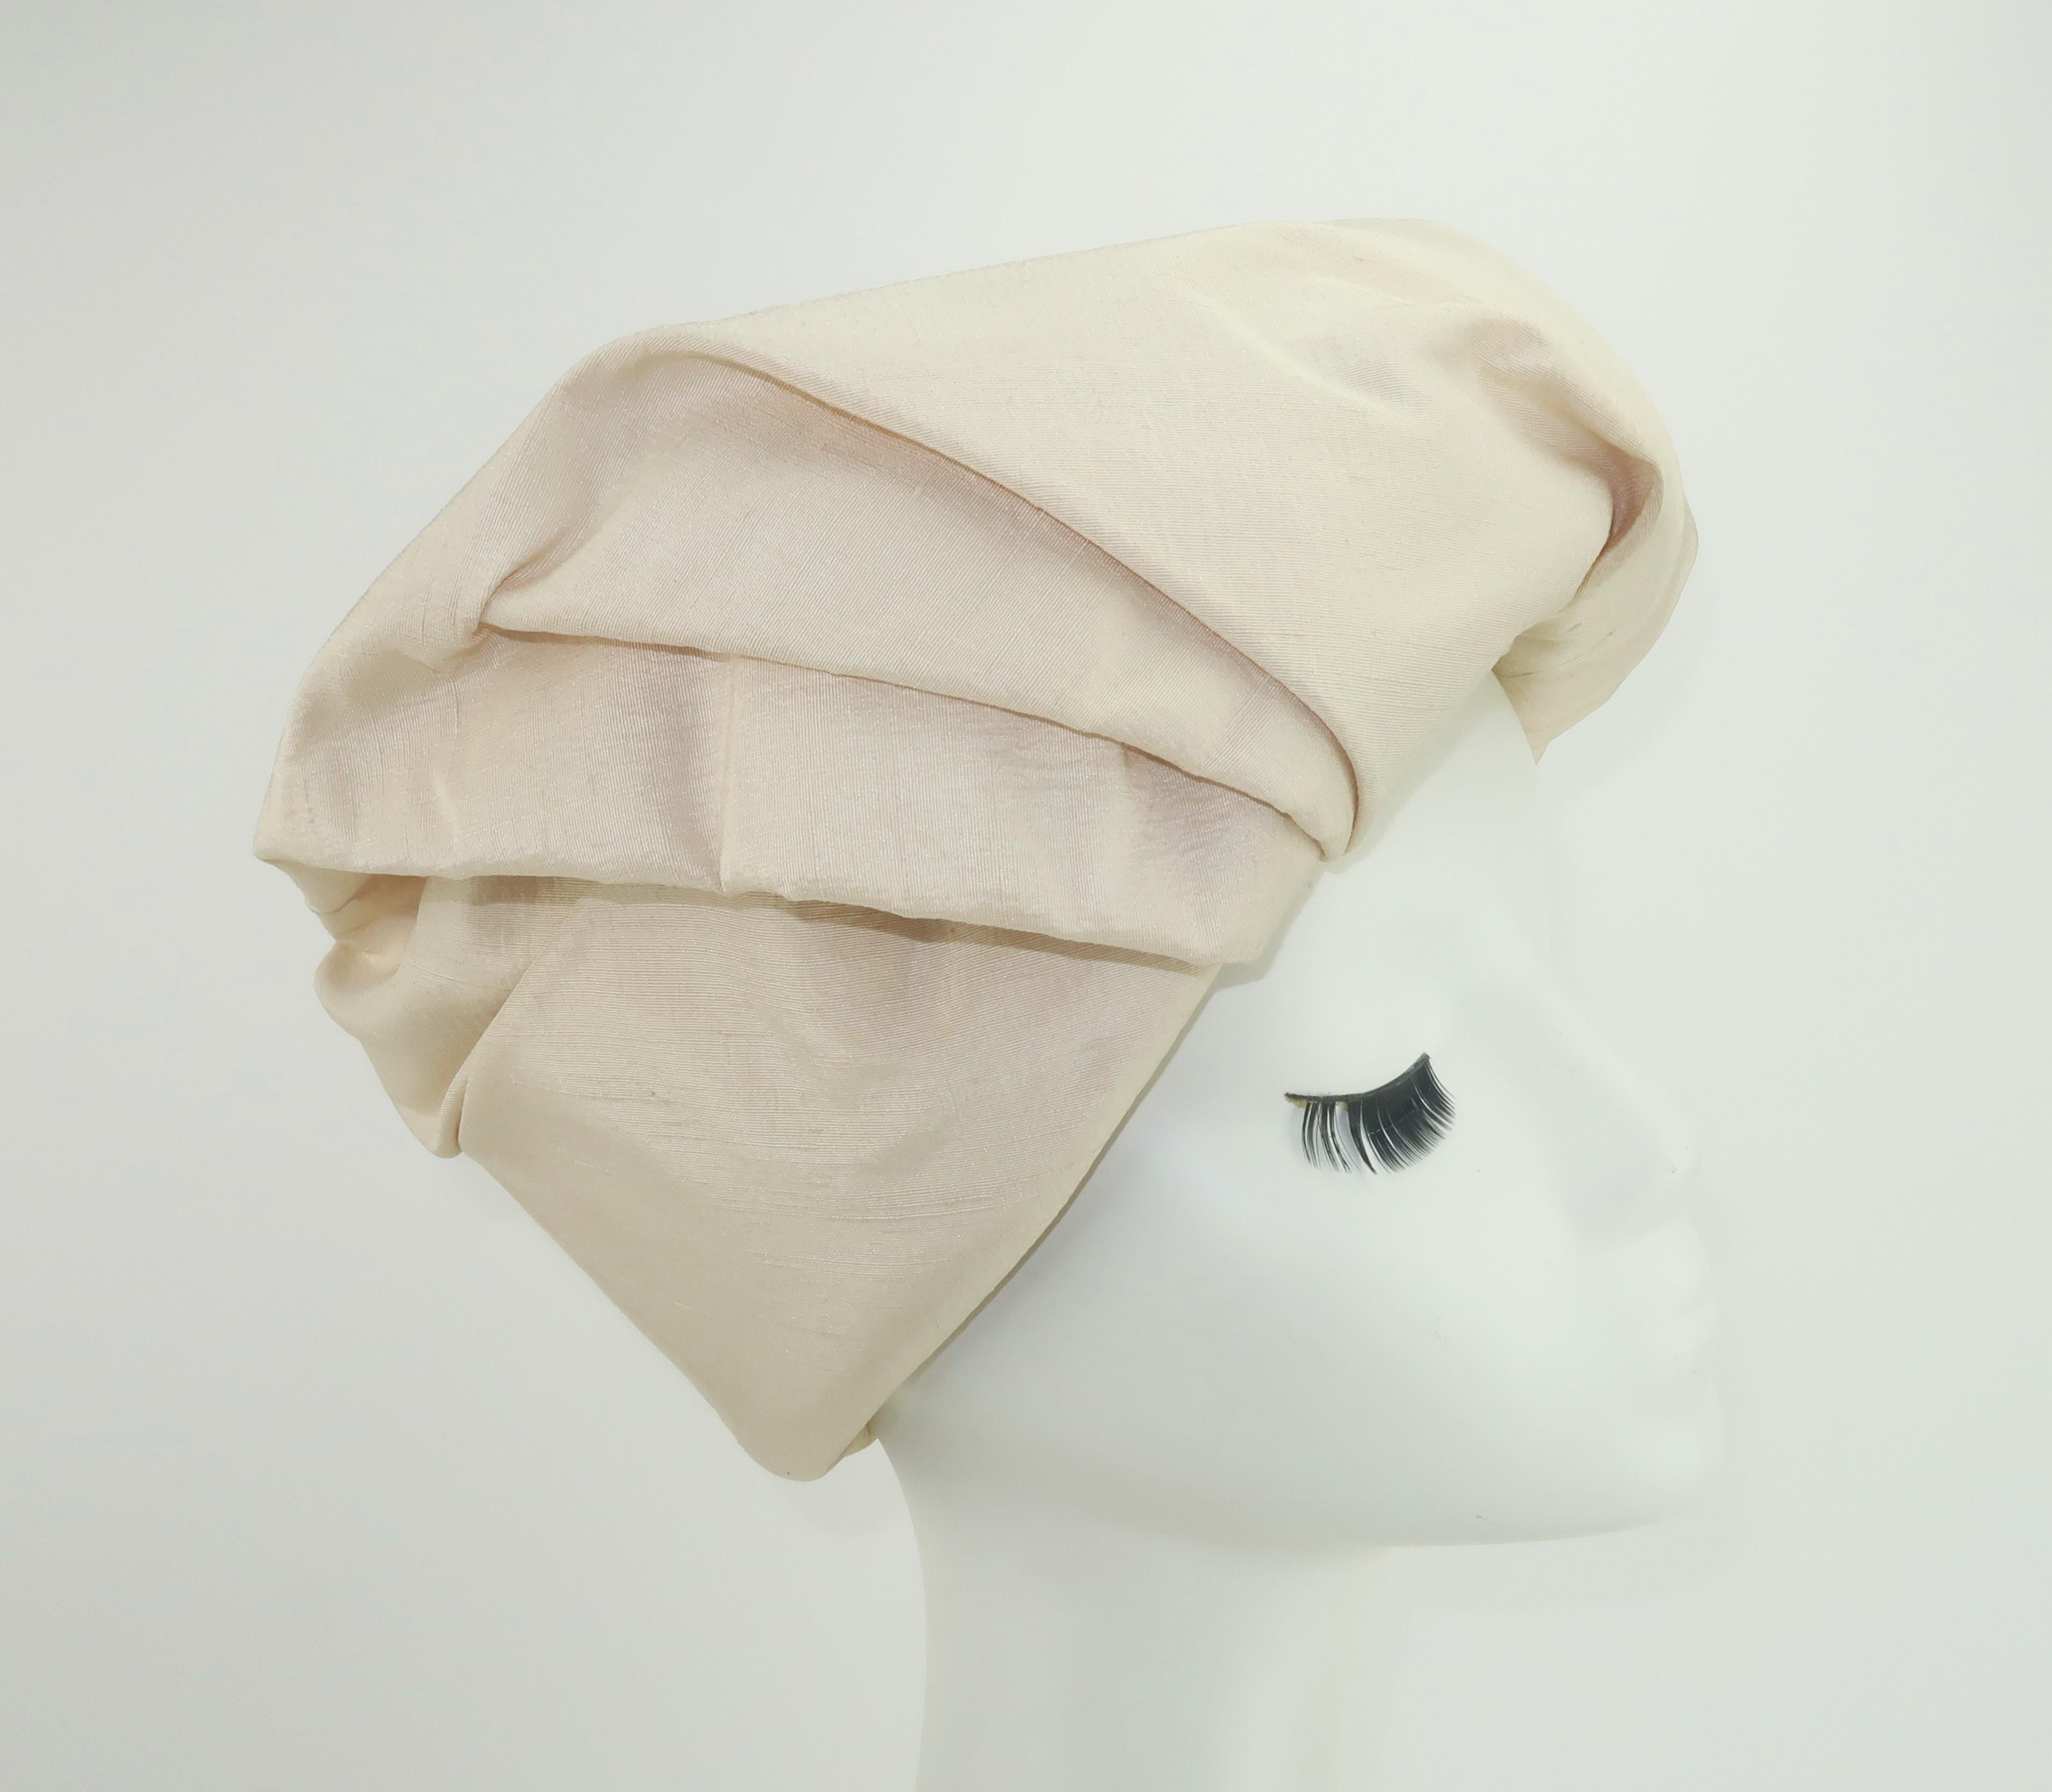 C.1960 Neiman Marcus 'Made to Order' silk shantung hat in an ivory or candlelight white shade.  The hat has a chic turban style design with effortless folds that create a stylish topper.  It takes on a casual look when worn backwards as shown in